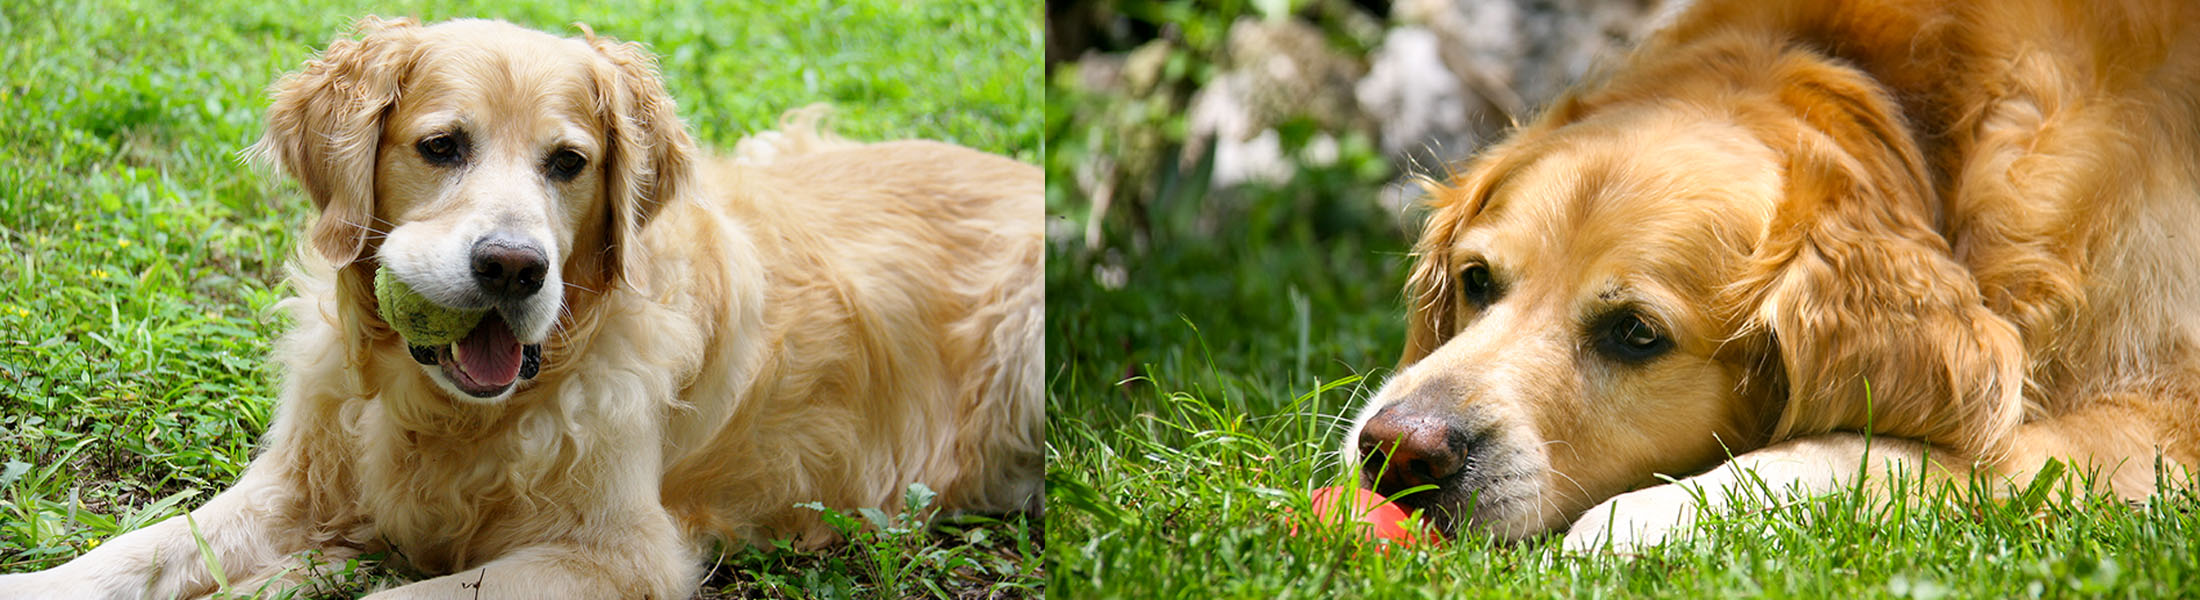 Bo enjoys being outside in the grass with his toys.